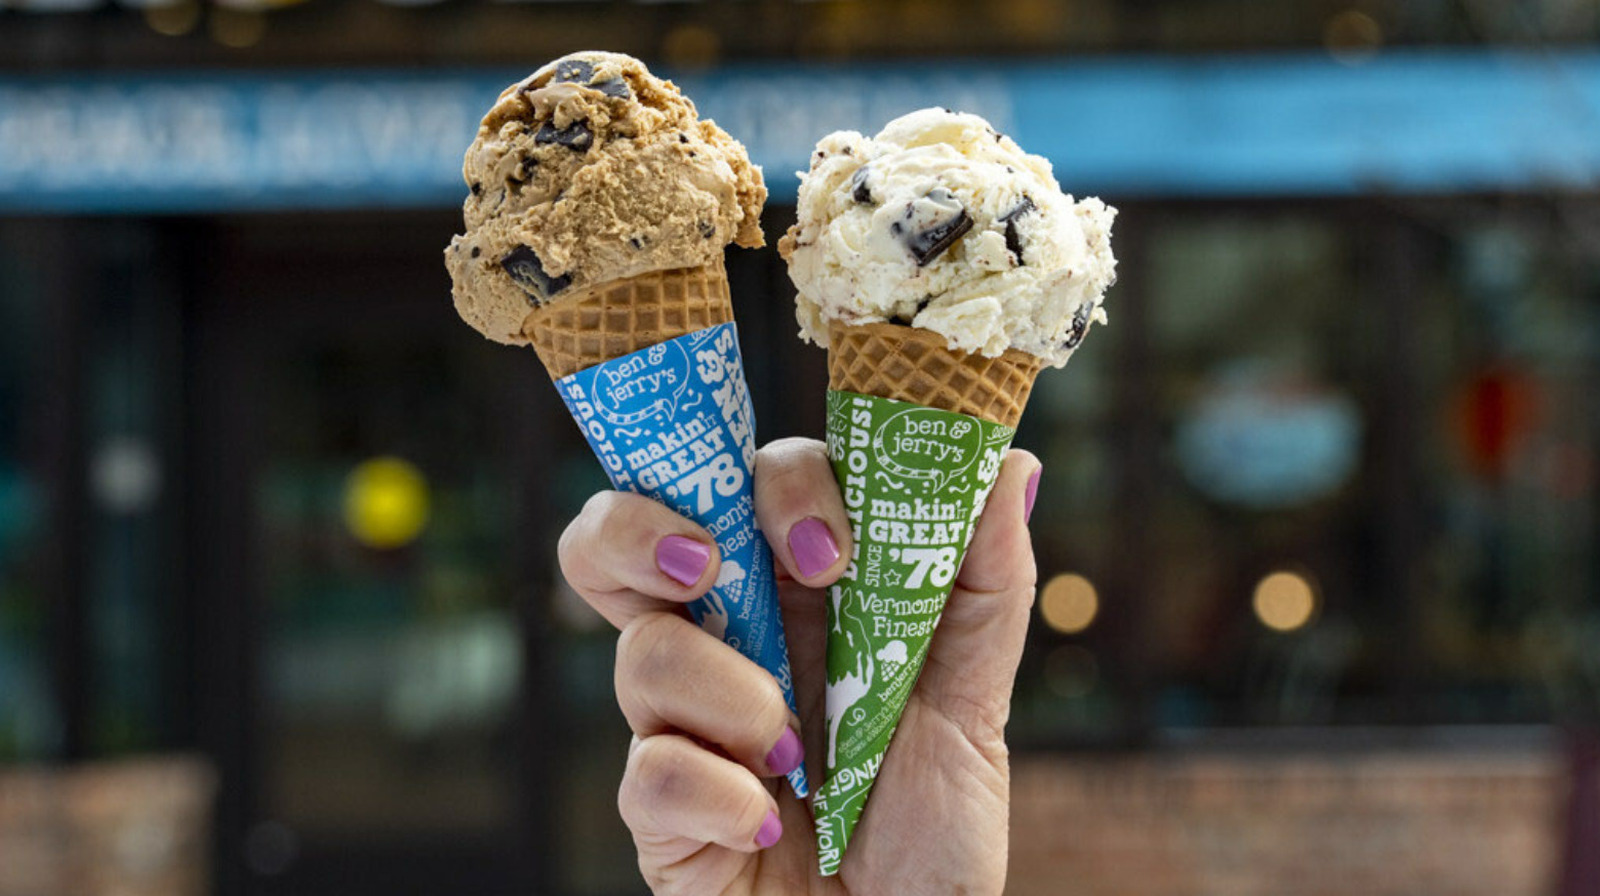 Free Cone Day Is Returning To Ben & Jerry's For The First Time In Years